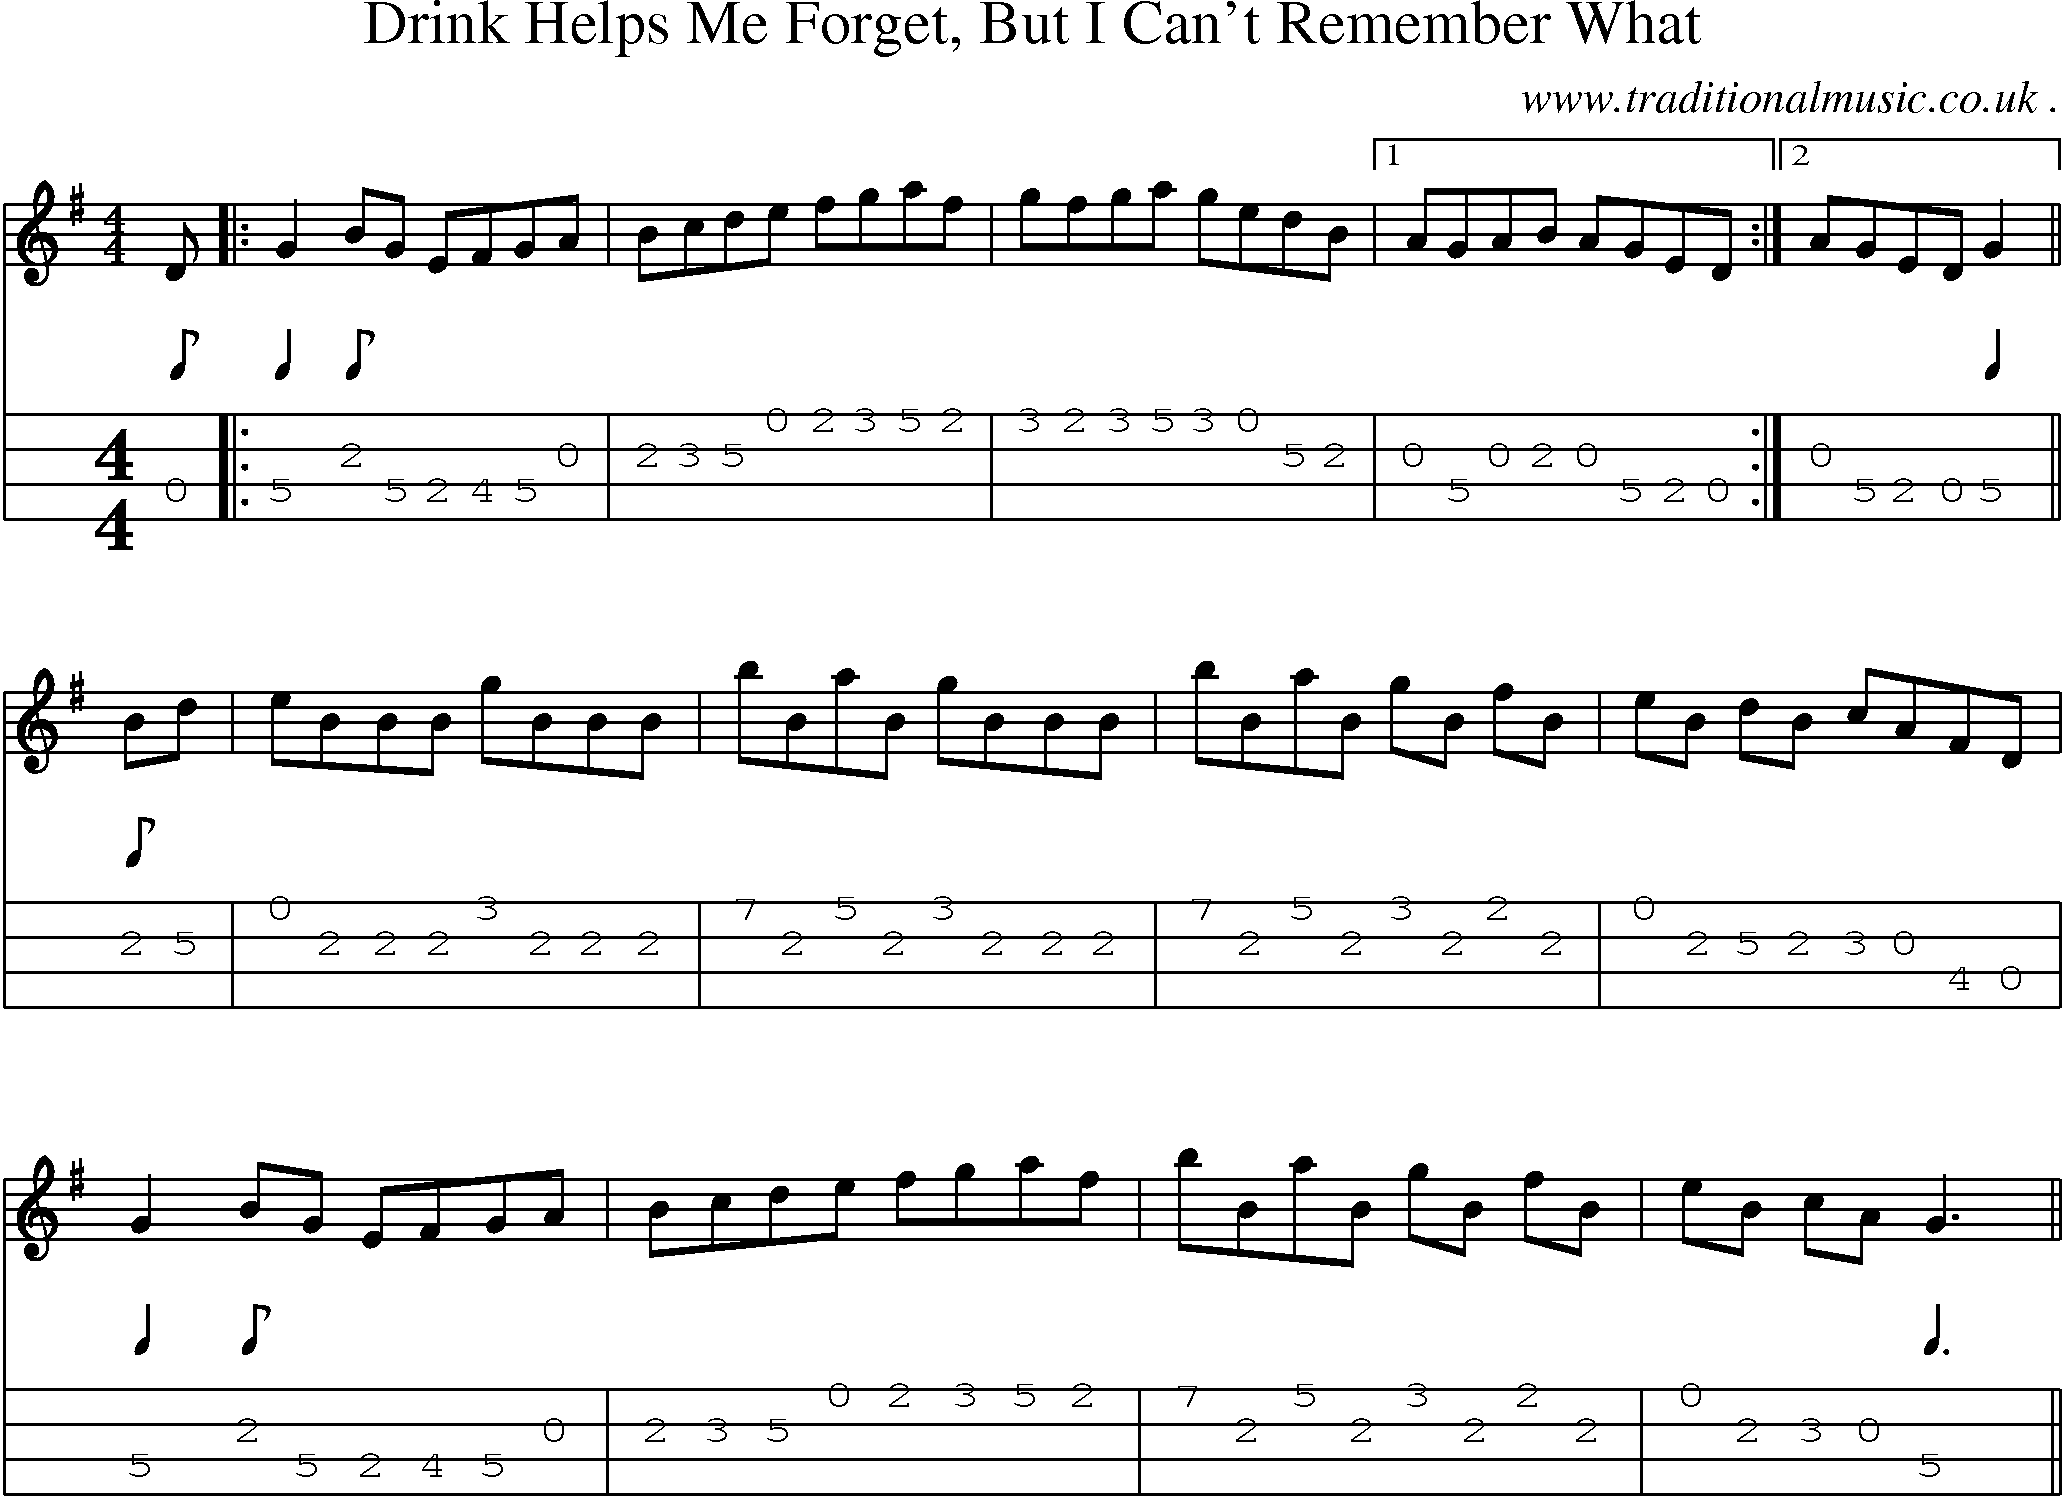 Sheet-music  score, Chords and Mandolin Tabs for Drink Helps Me Forget But I Cant Remember What